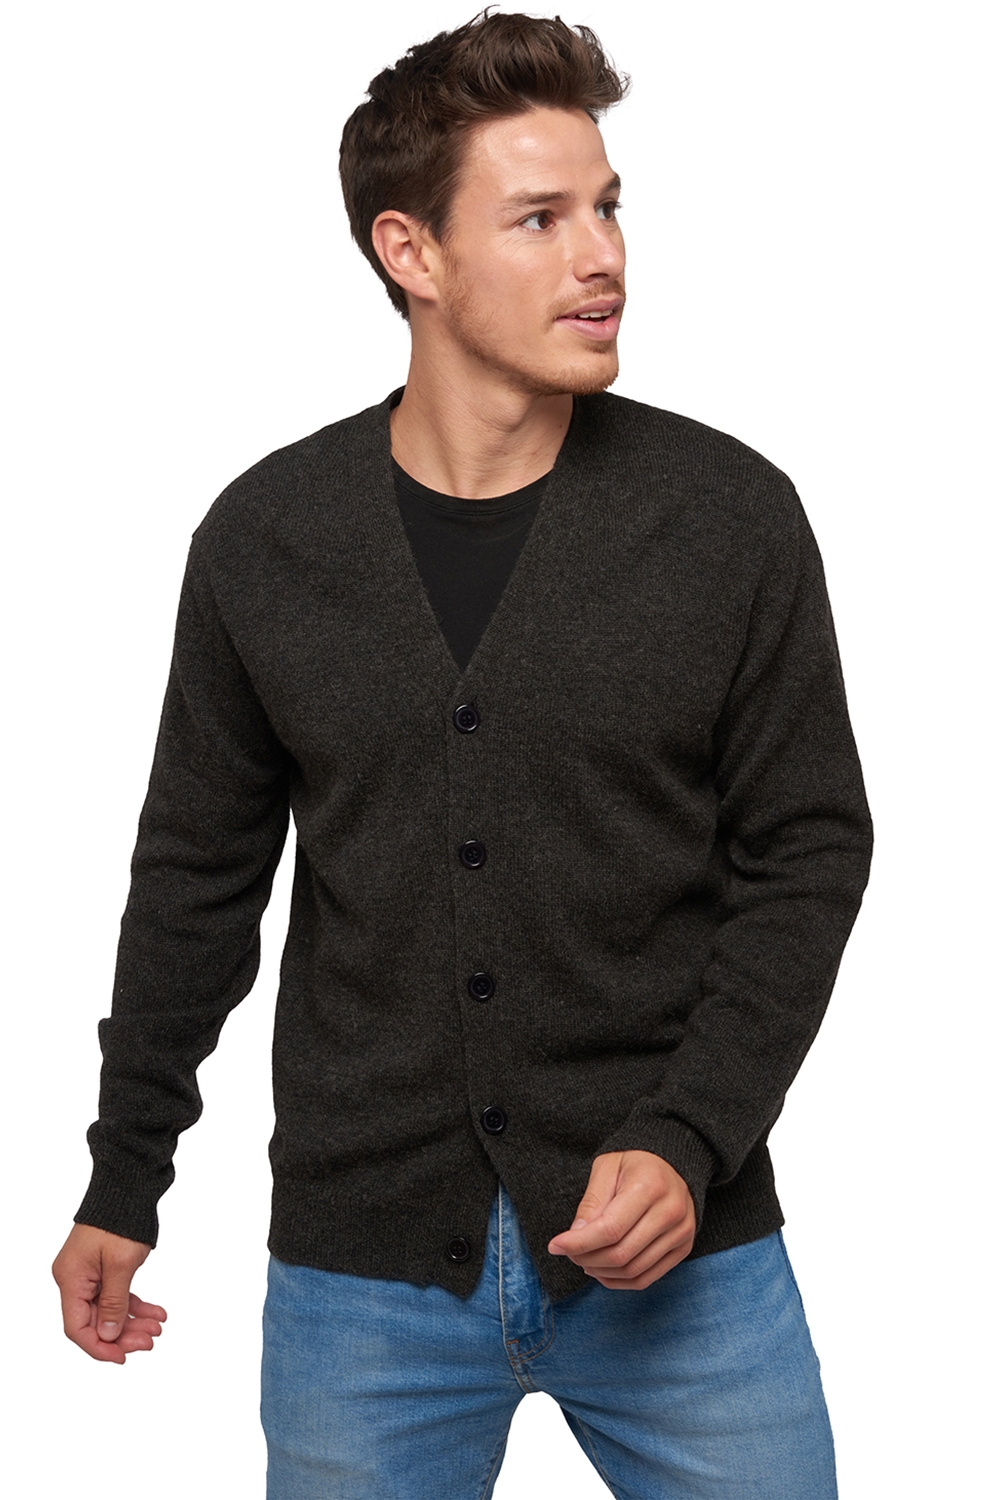 Chameau pull homme cameleon anthracite l